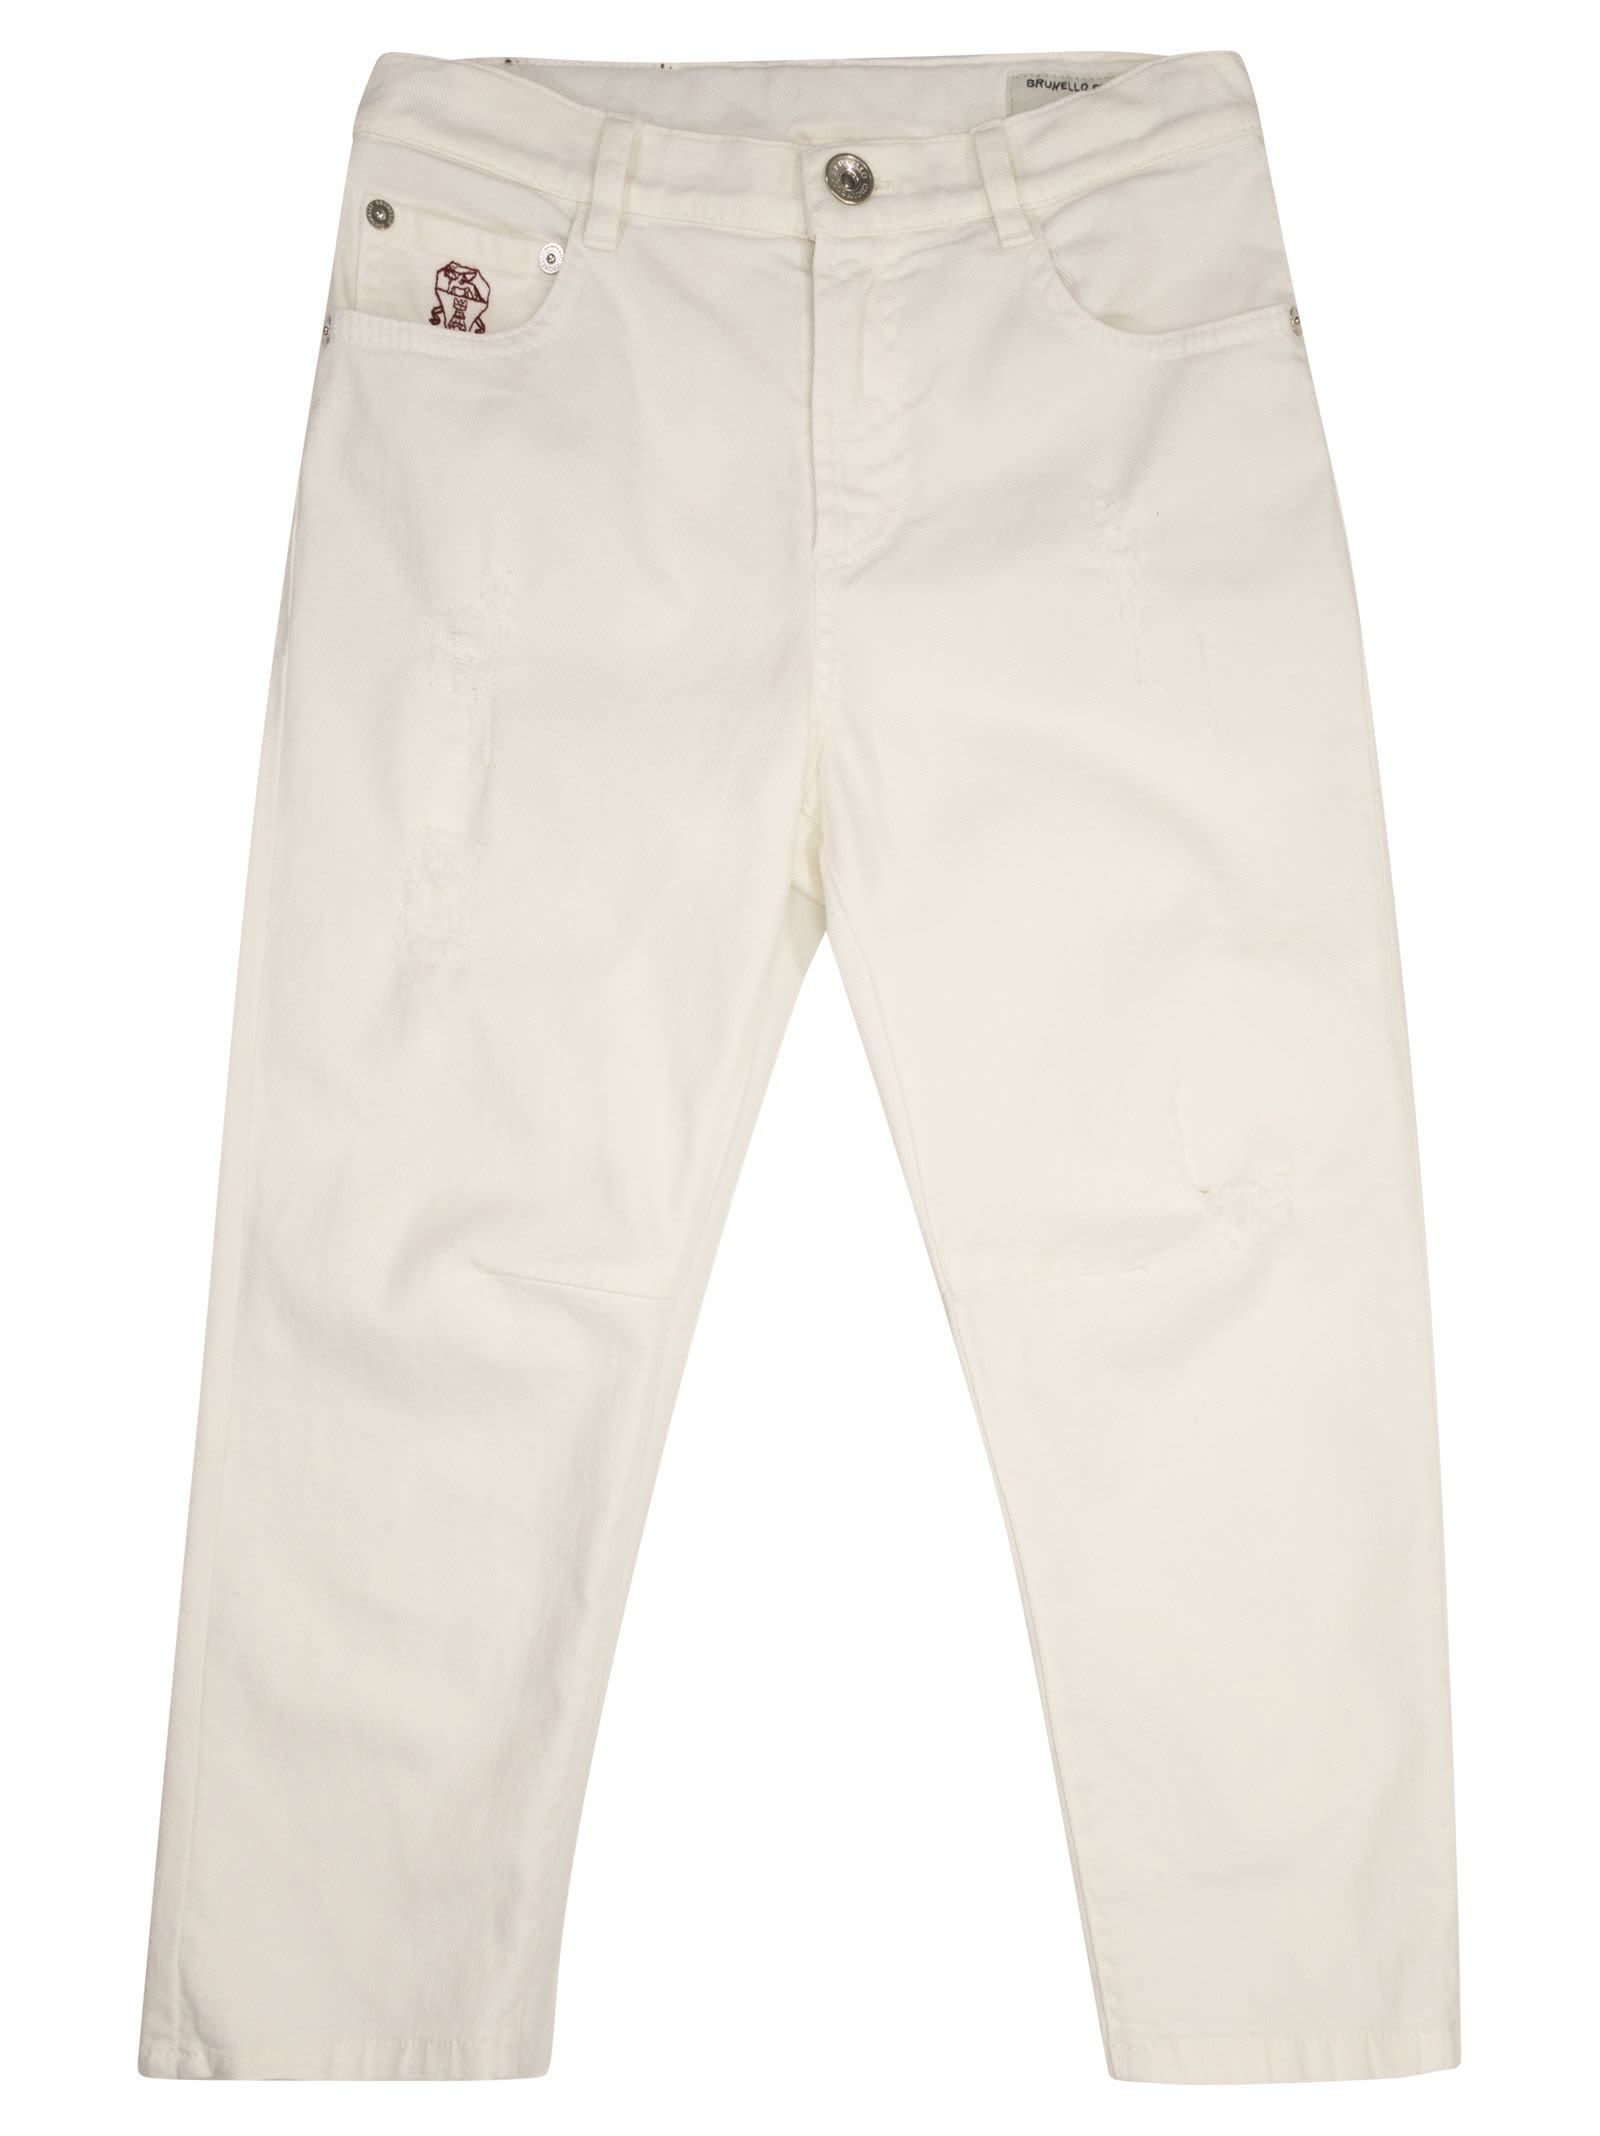 BRUNELLO CUCINELLI FIVE-POCKET TROUSERS IN LIGHT DYED COTTON COMFORT DENIM WITH RIPS